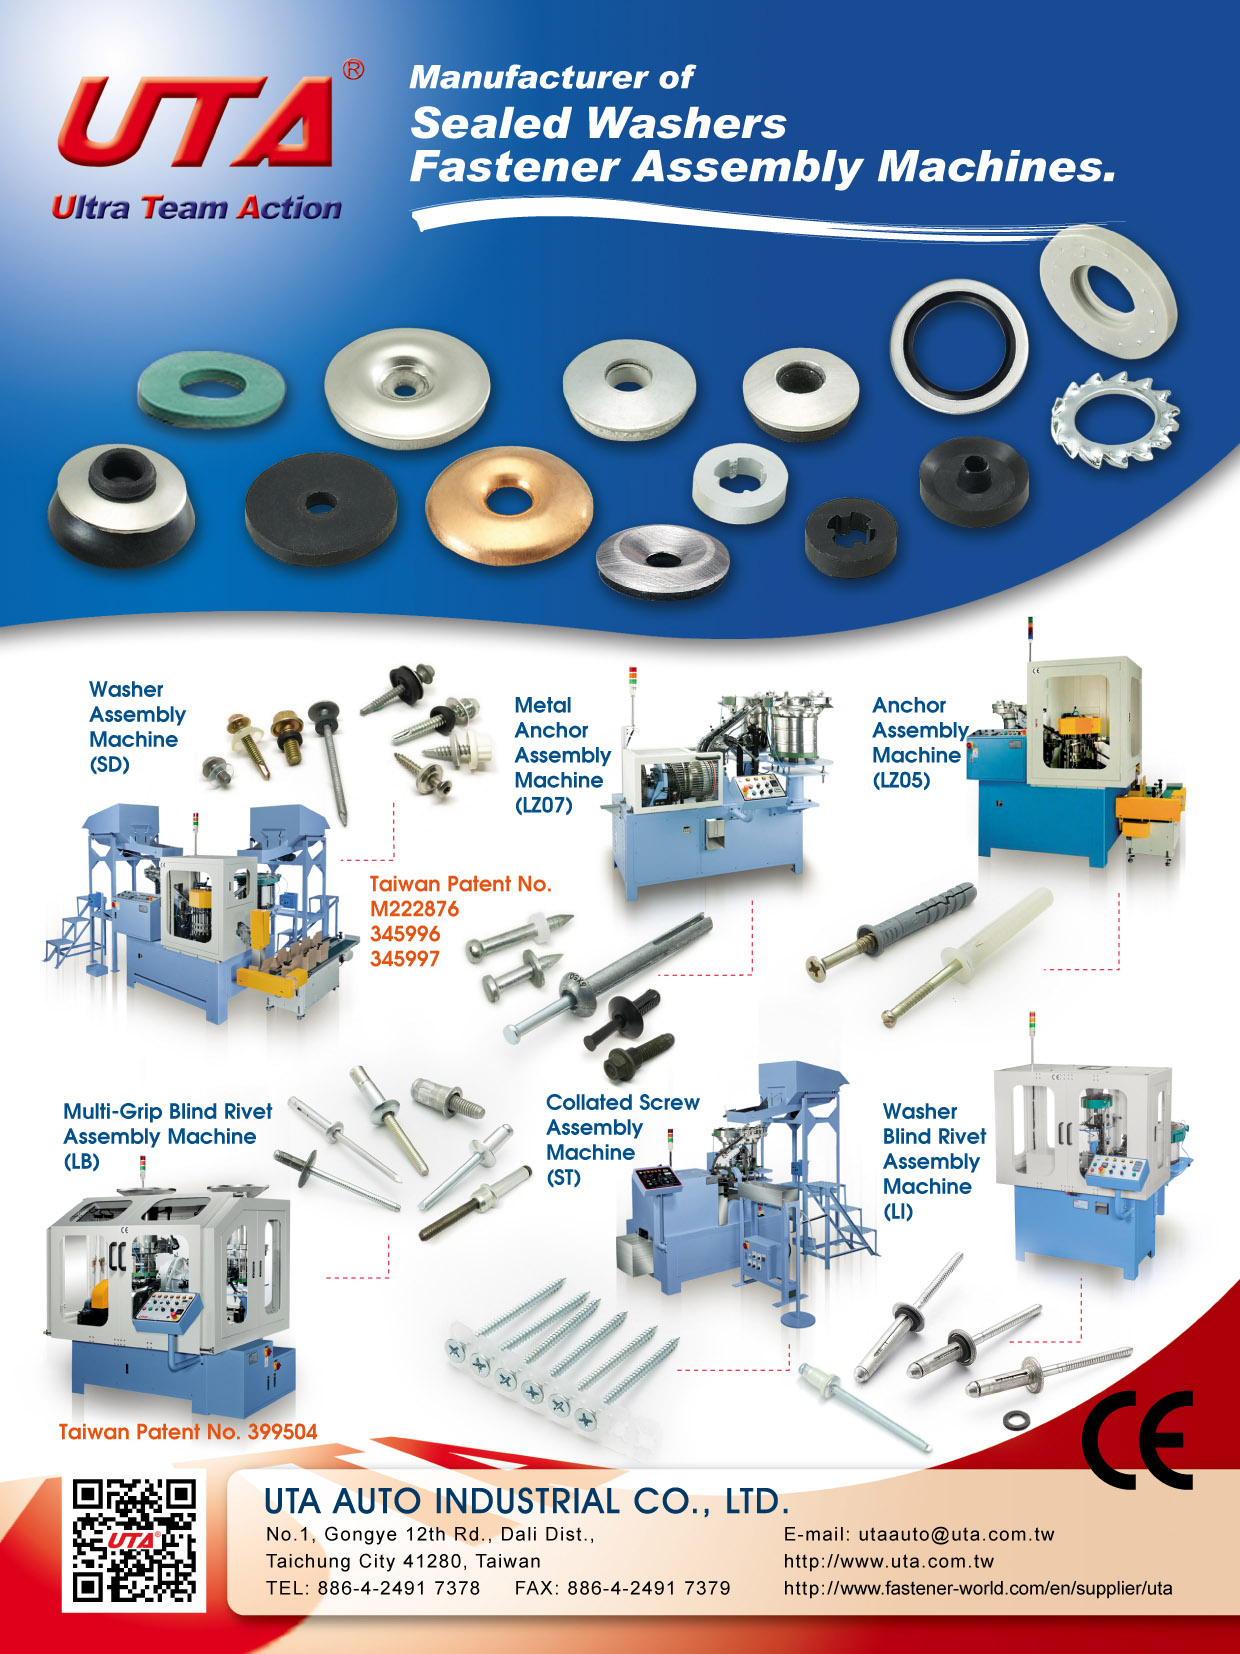 UTA AUTO INDUSTRIAL CO., LTD. , Washer Assembly Machine(SD),Metal Anchor Assembly Machine(LZ07),Anchor Assembly Machine(LZO5),Multi-Grip Blind Rivet Assembly Machine(LB),Collated Screw Assembly Machine(ST),Washer Blind Rivet Assembly Machine(L1) , Screw & Nylon Anchor Assembly Machine